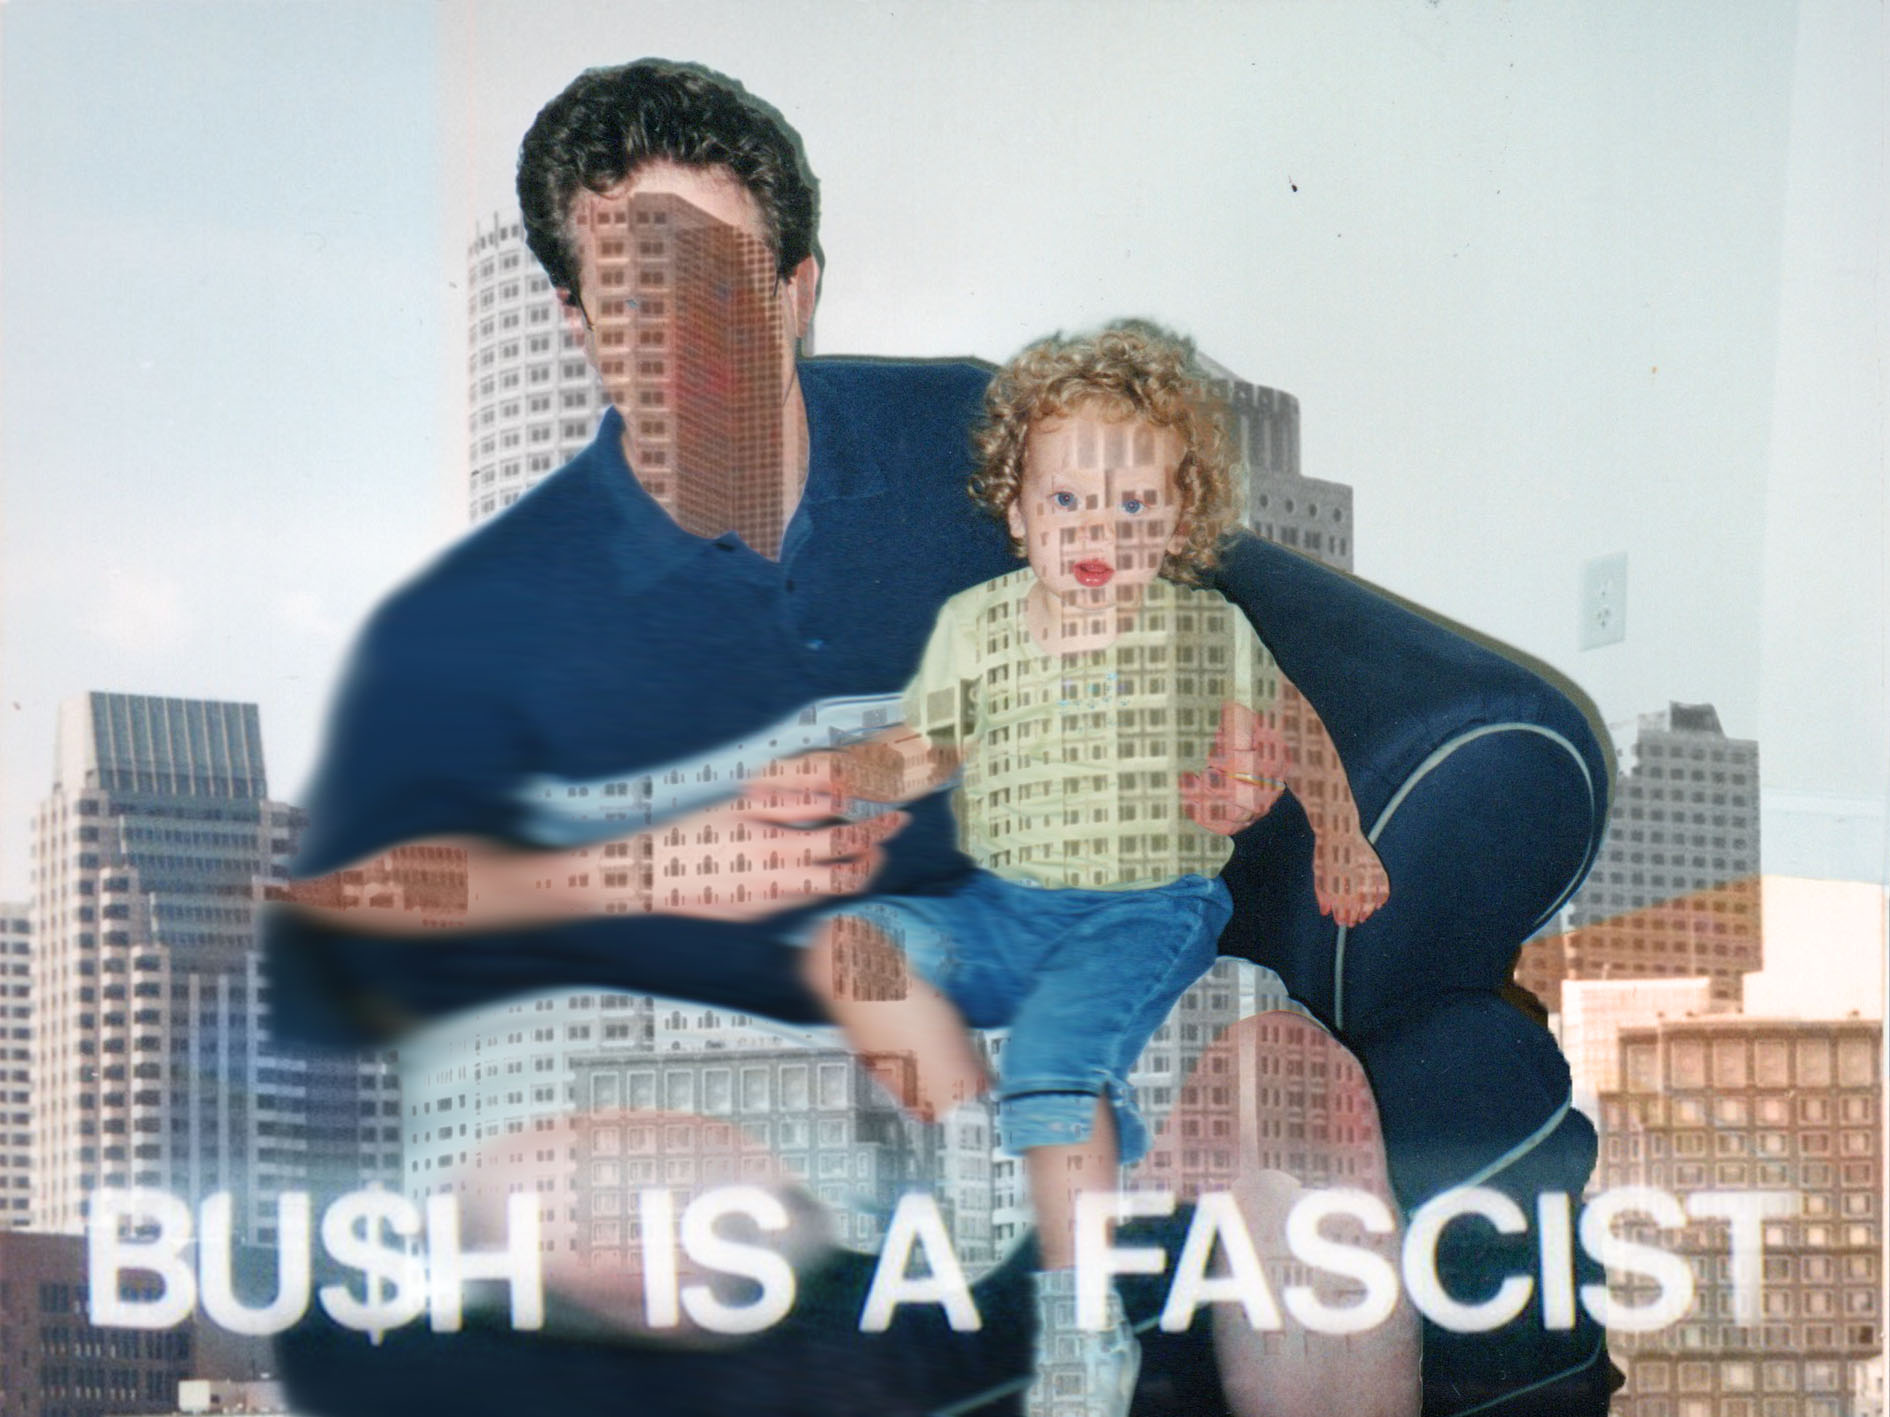 A photoshop collage of a family photo, superimposed over a skyline. The text reads "Bu$h is a Fascist".